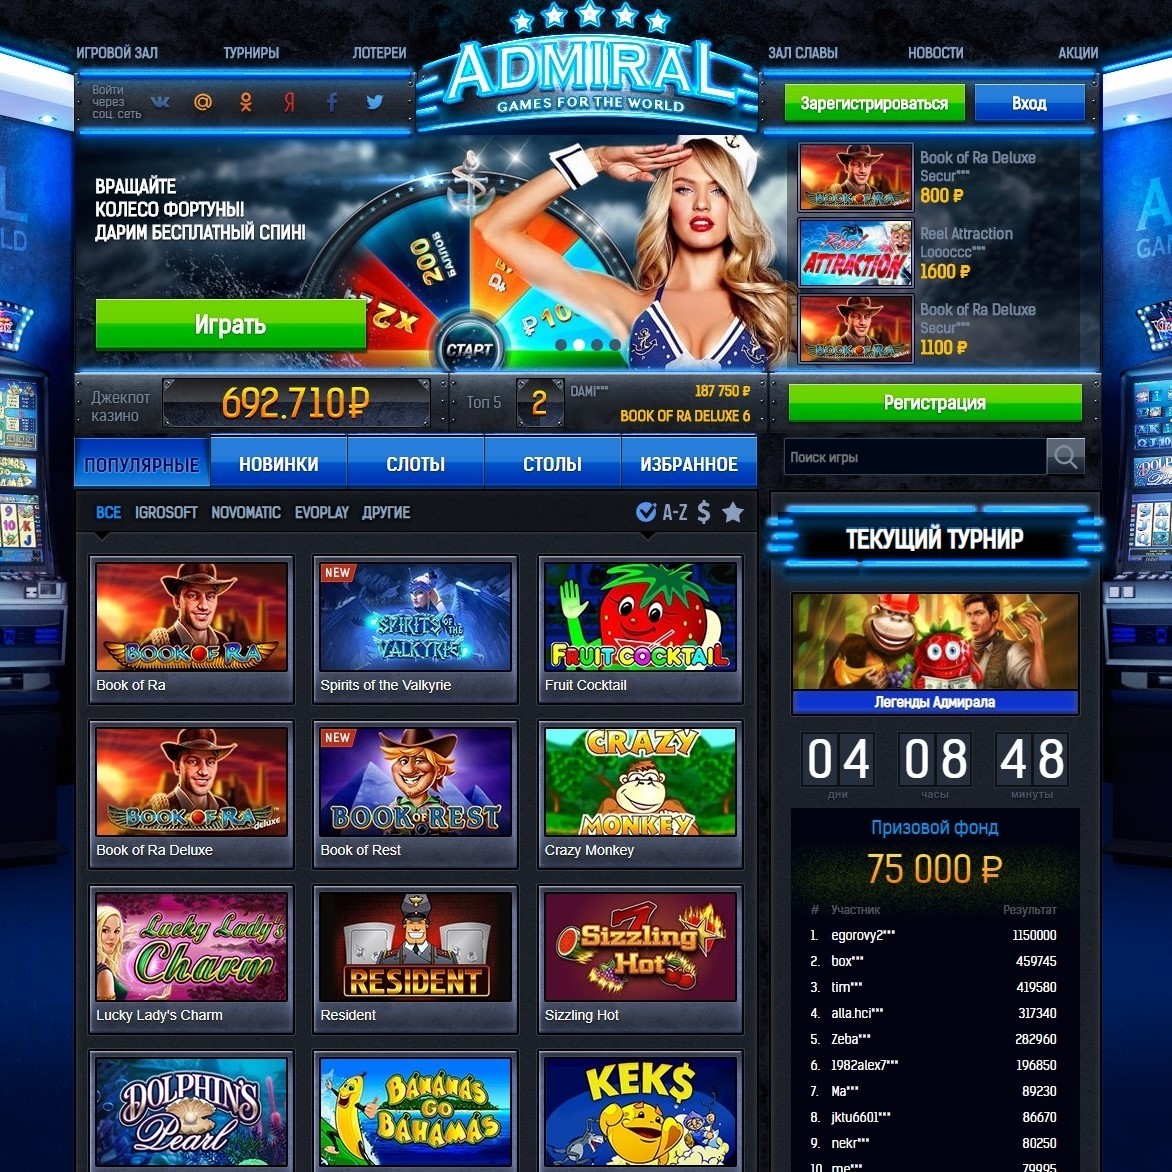 Free spins no deposit required keep your winnings